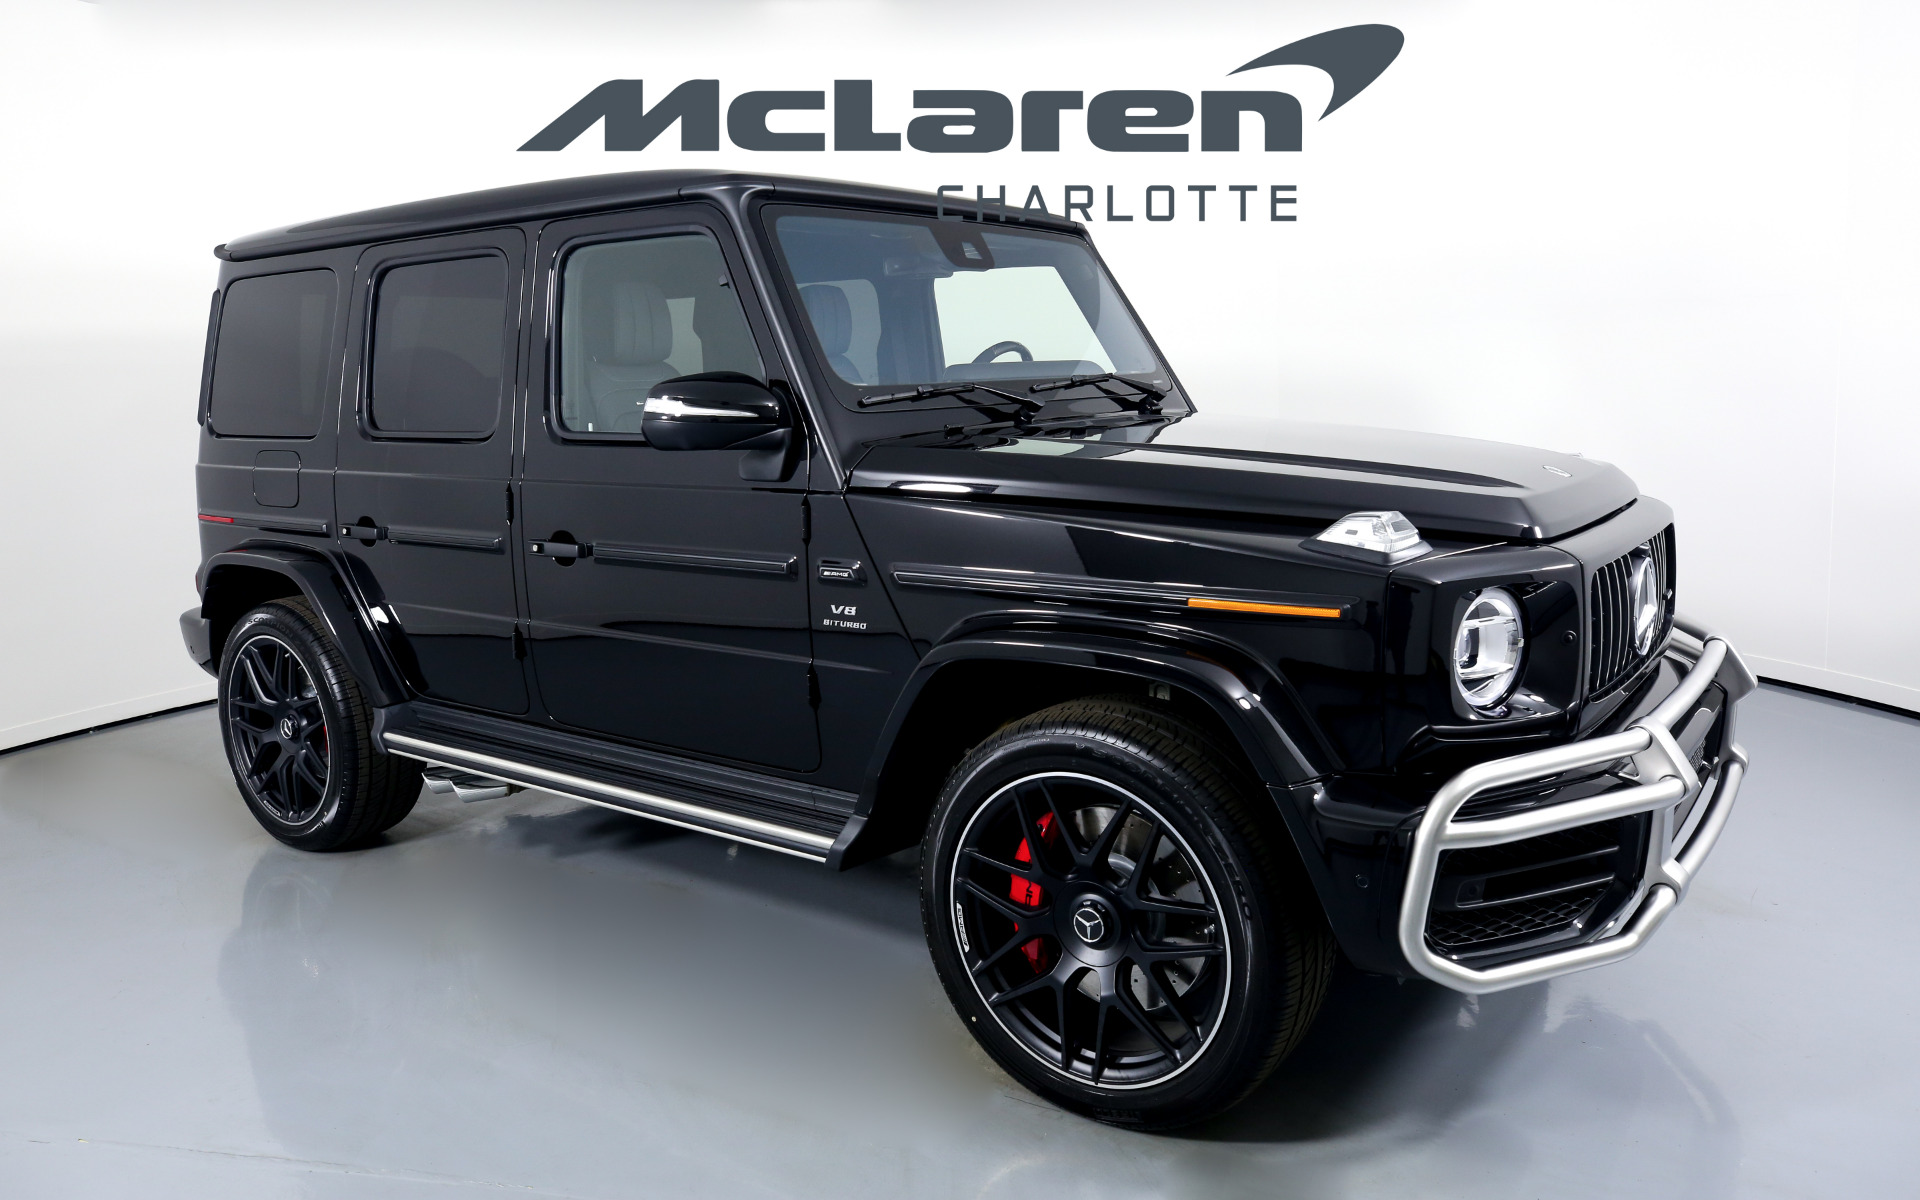 Used 21 Mercedes Benz G Class Amg G 63 For Sale Special Pricing Mclaren Charlotte Stock